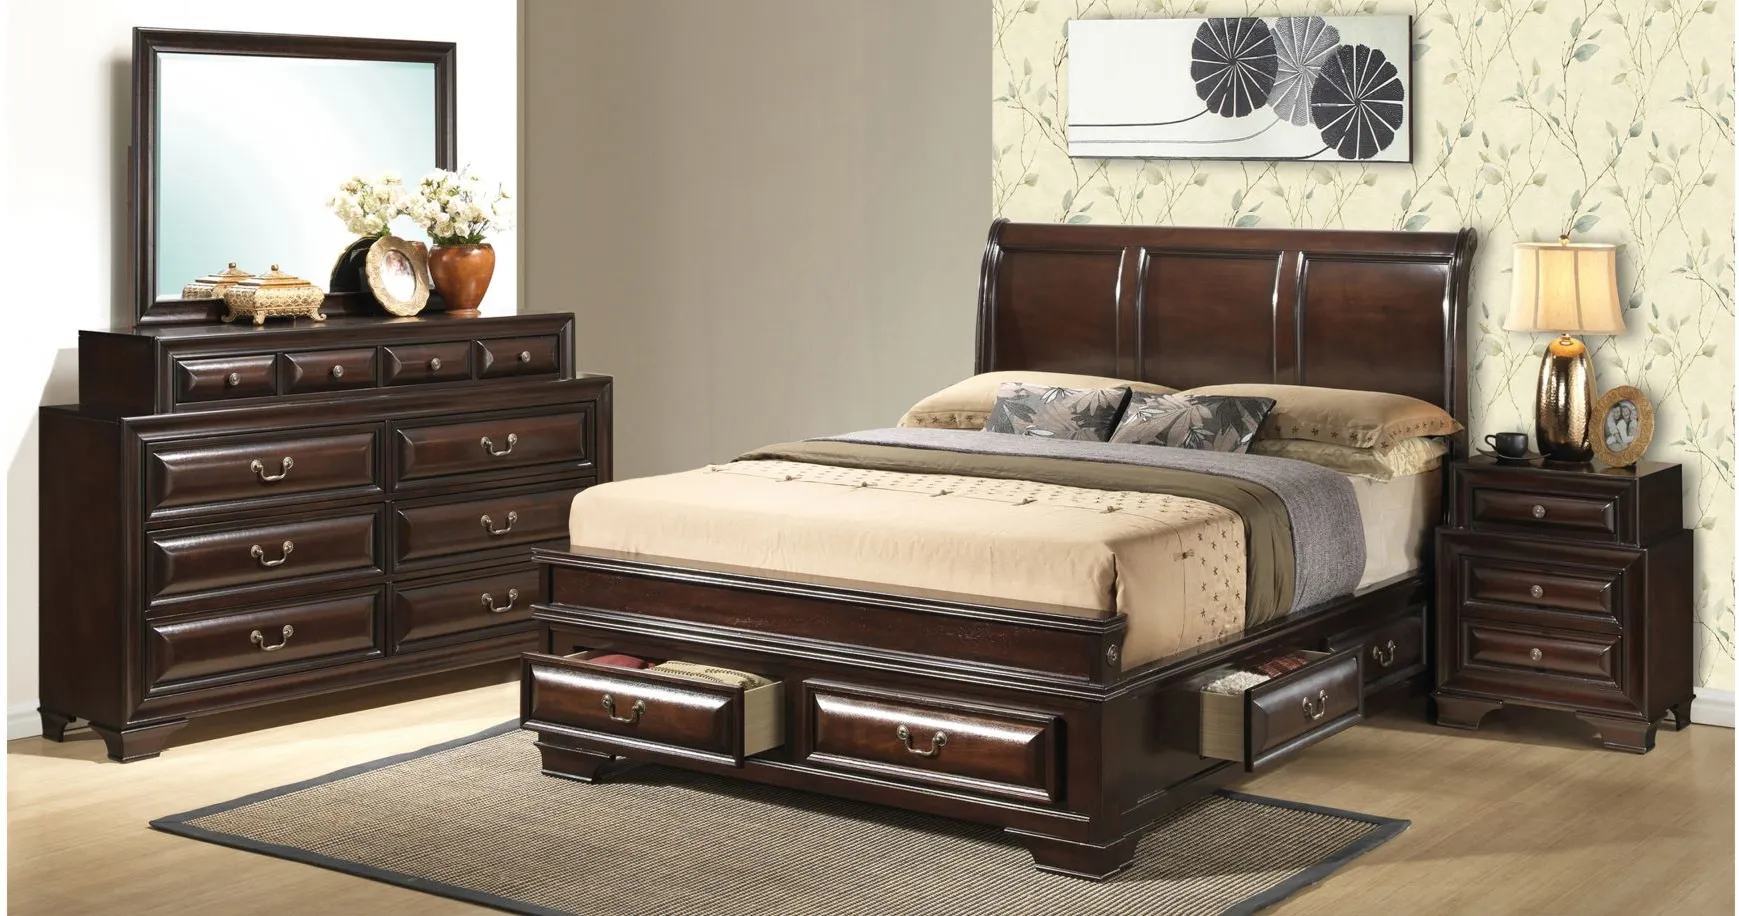 Sarasota 4-pc. Storage Bedroom Set in Cappuccino by Glory Furniture